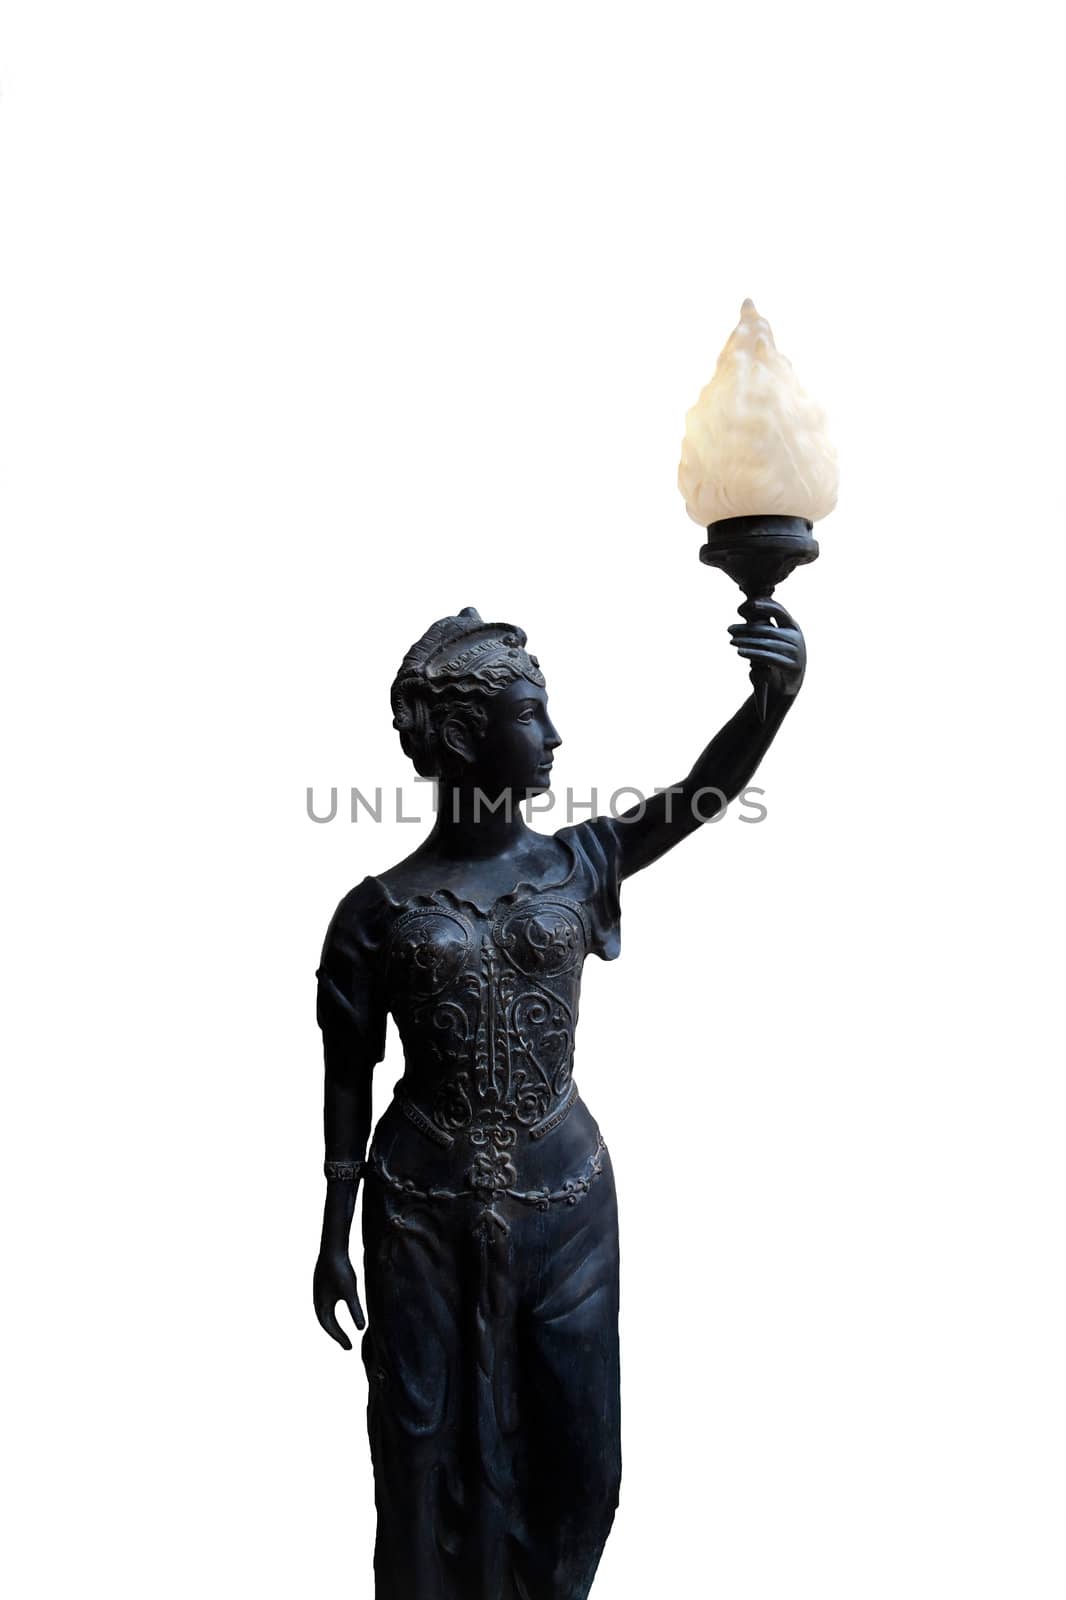 A statue isolation of a bronze woman holding a torch